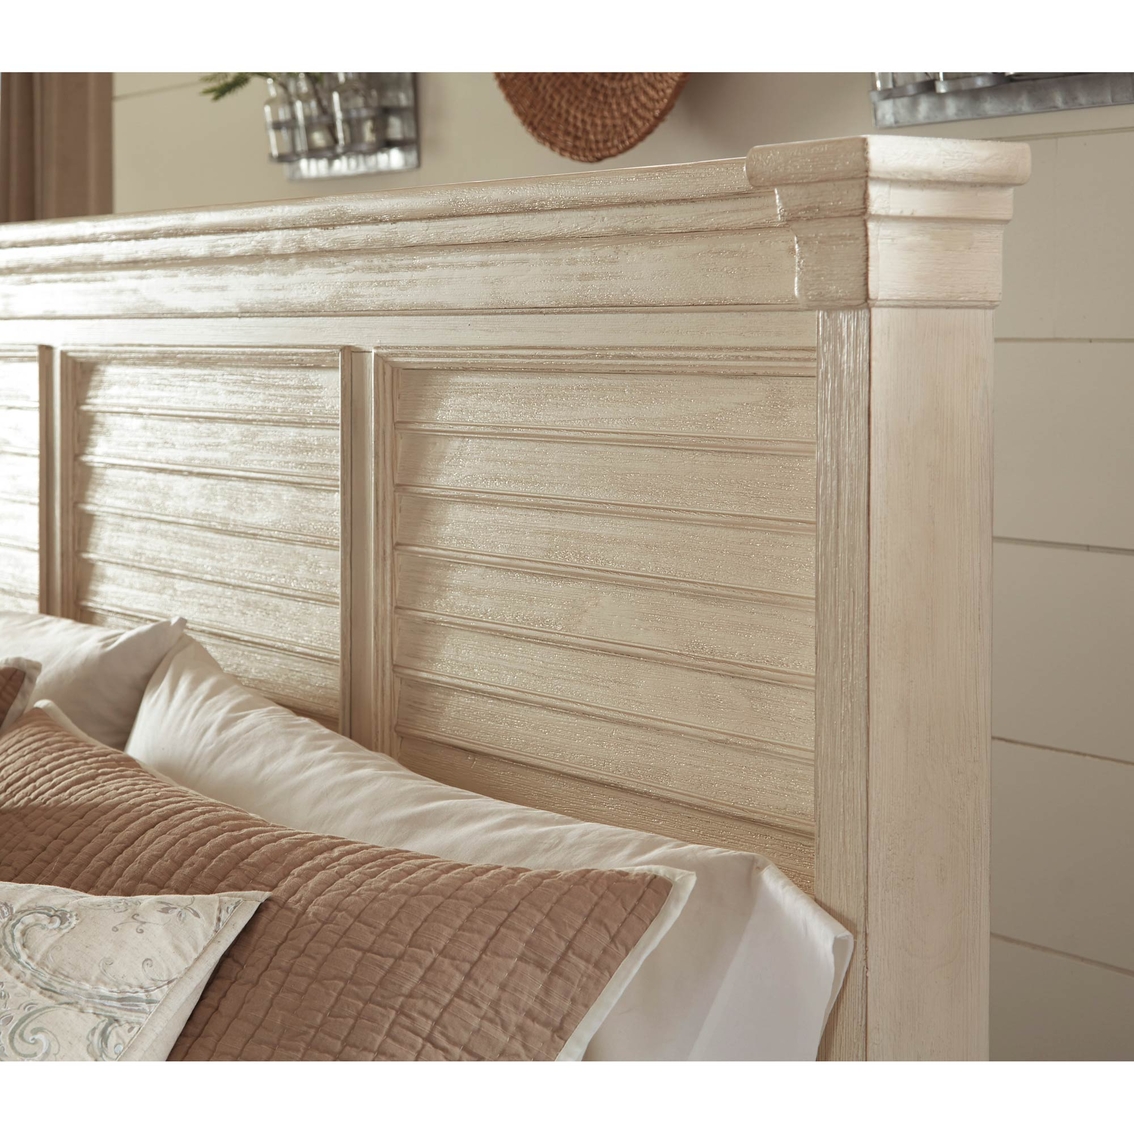 Signature Design by Ashley Bolanburg Louvered Bed - Image 2 of 4